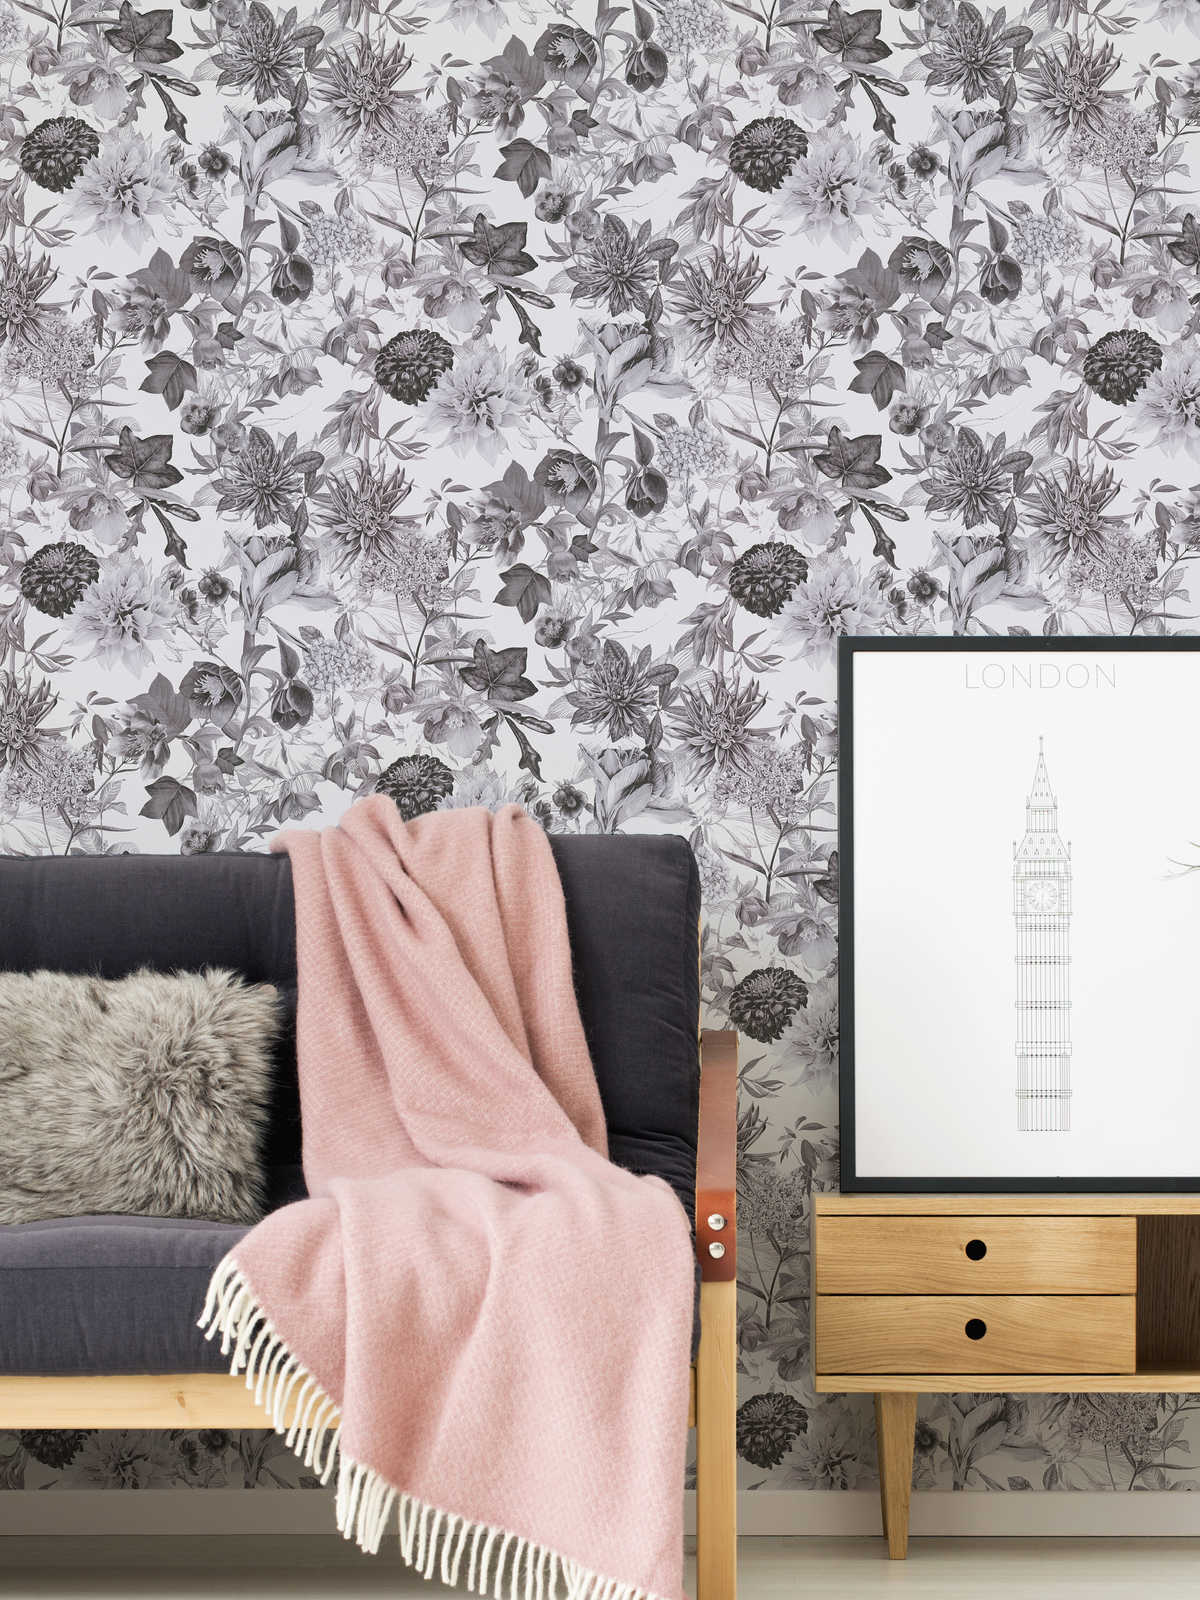             Black and white flowers wallpaper with floral pattern
        